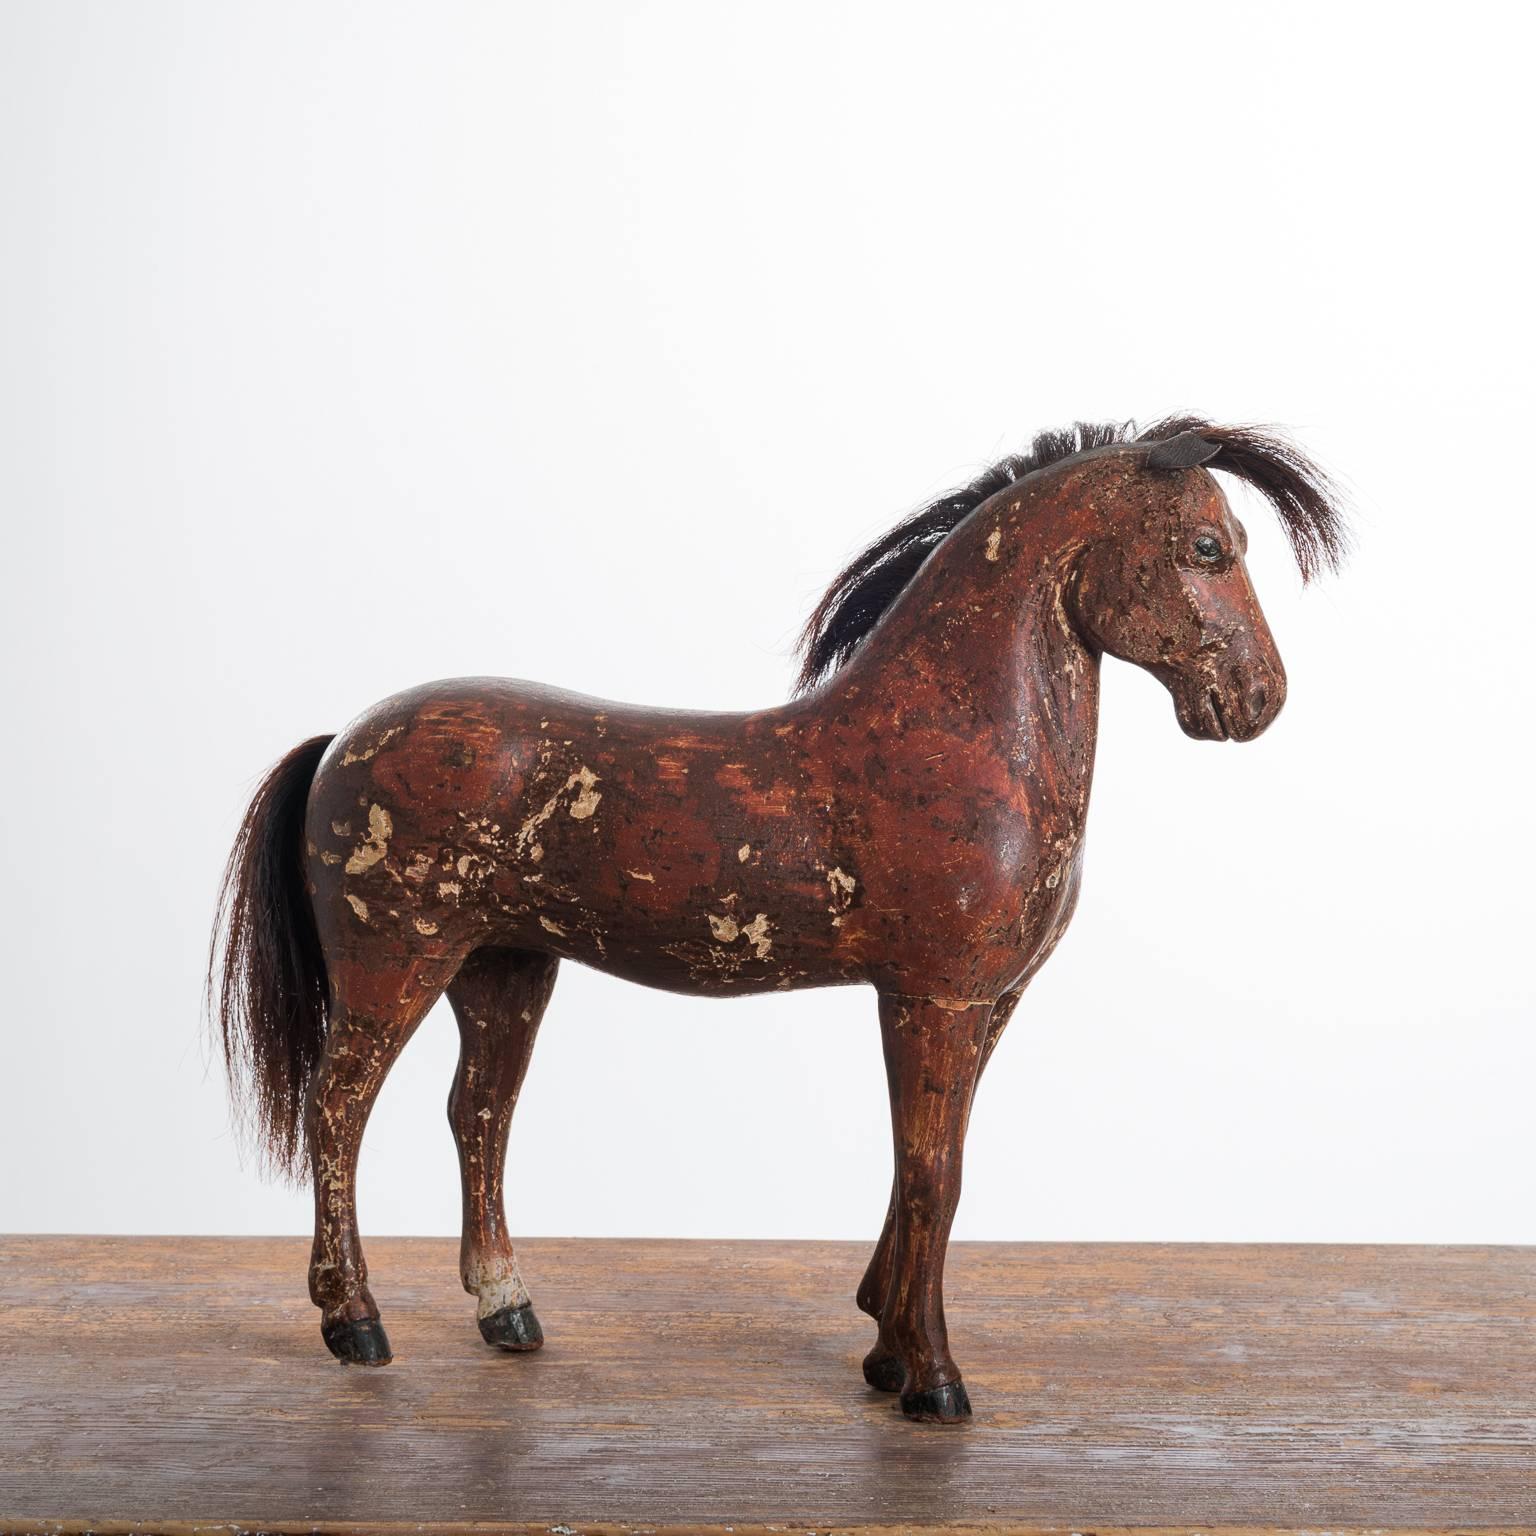 19th Century Swedish Wooden Horse from the Mid-1800s